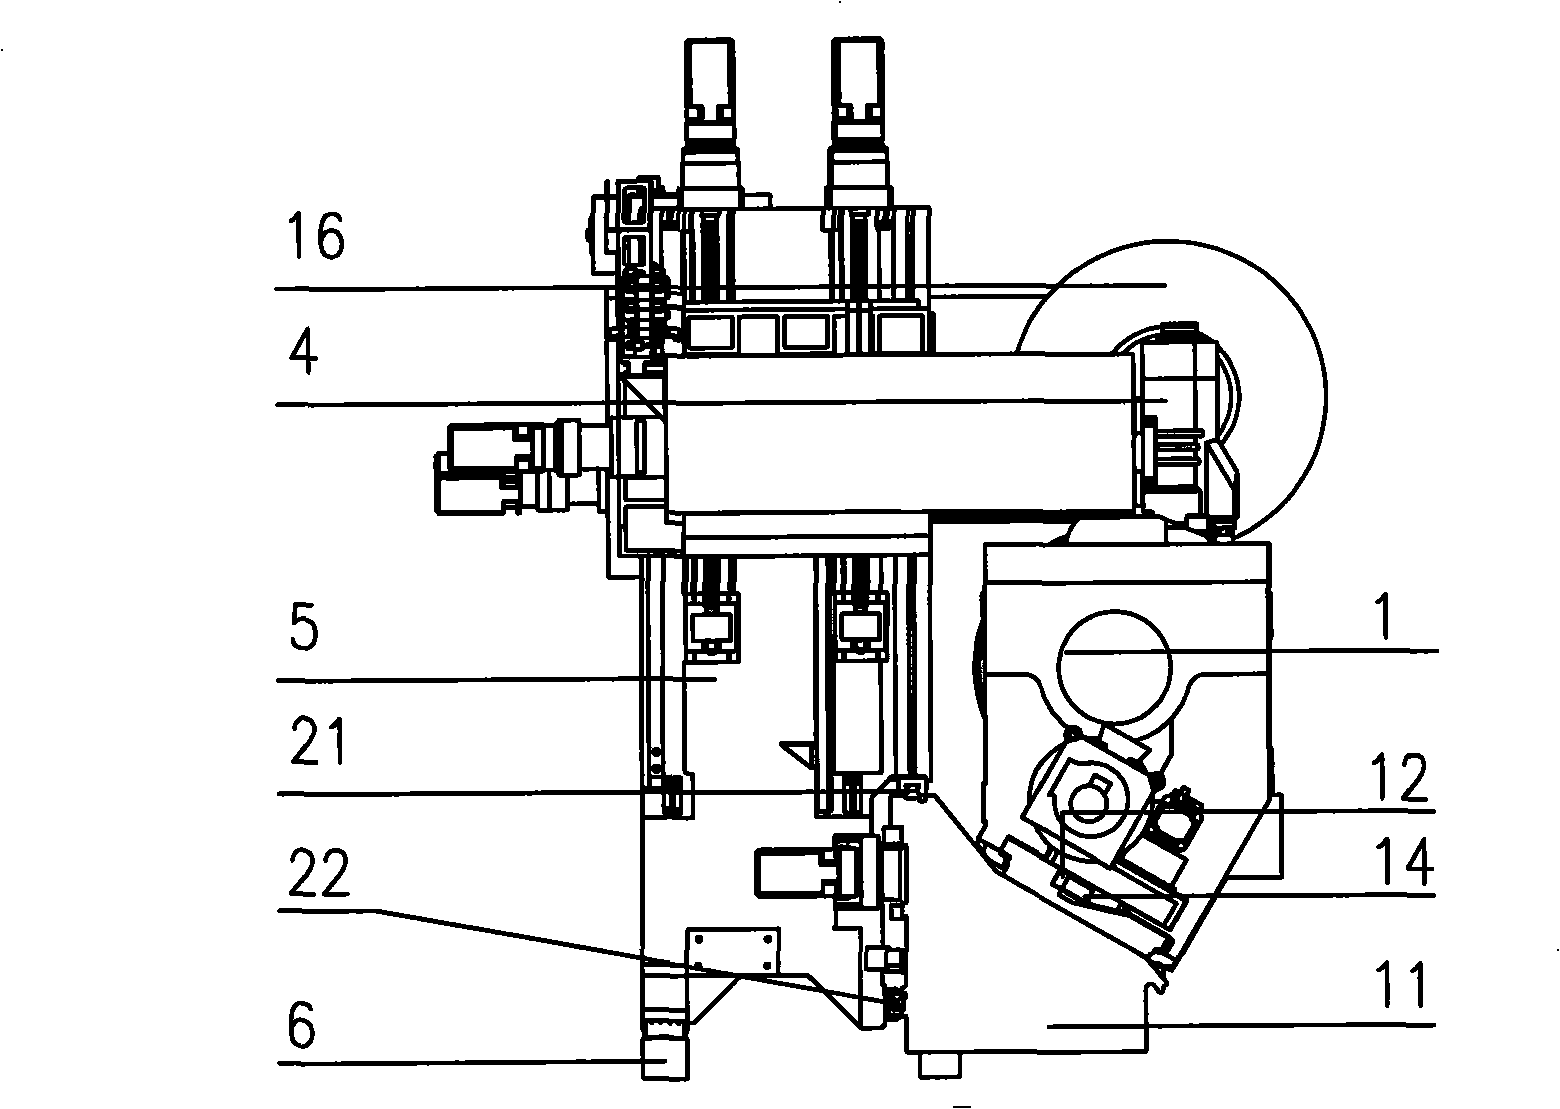 Integral structure of a turn-milling complex machining center